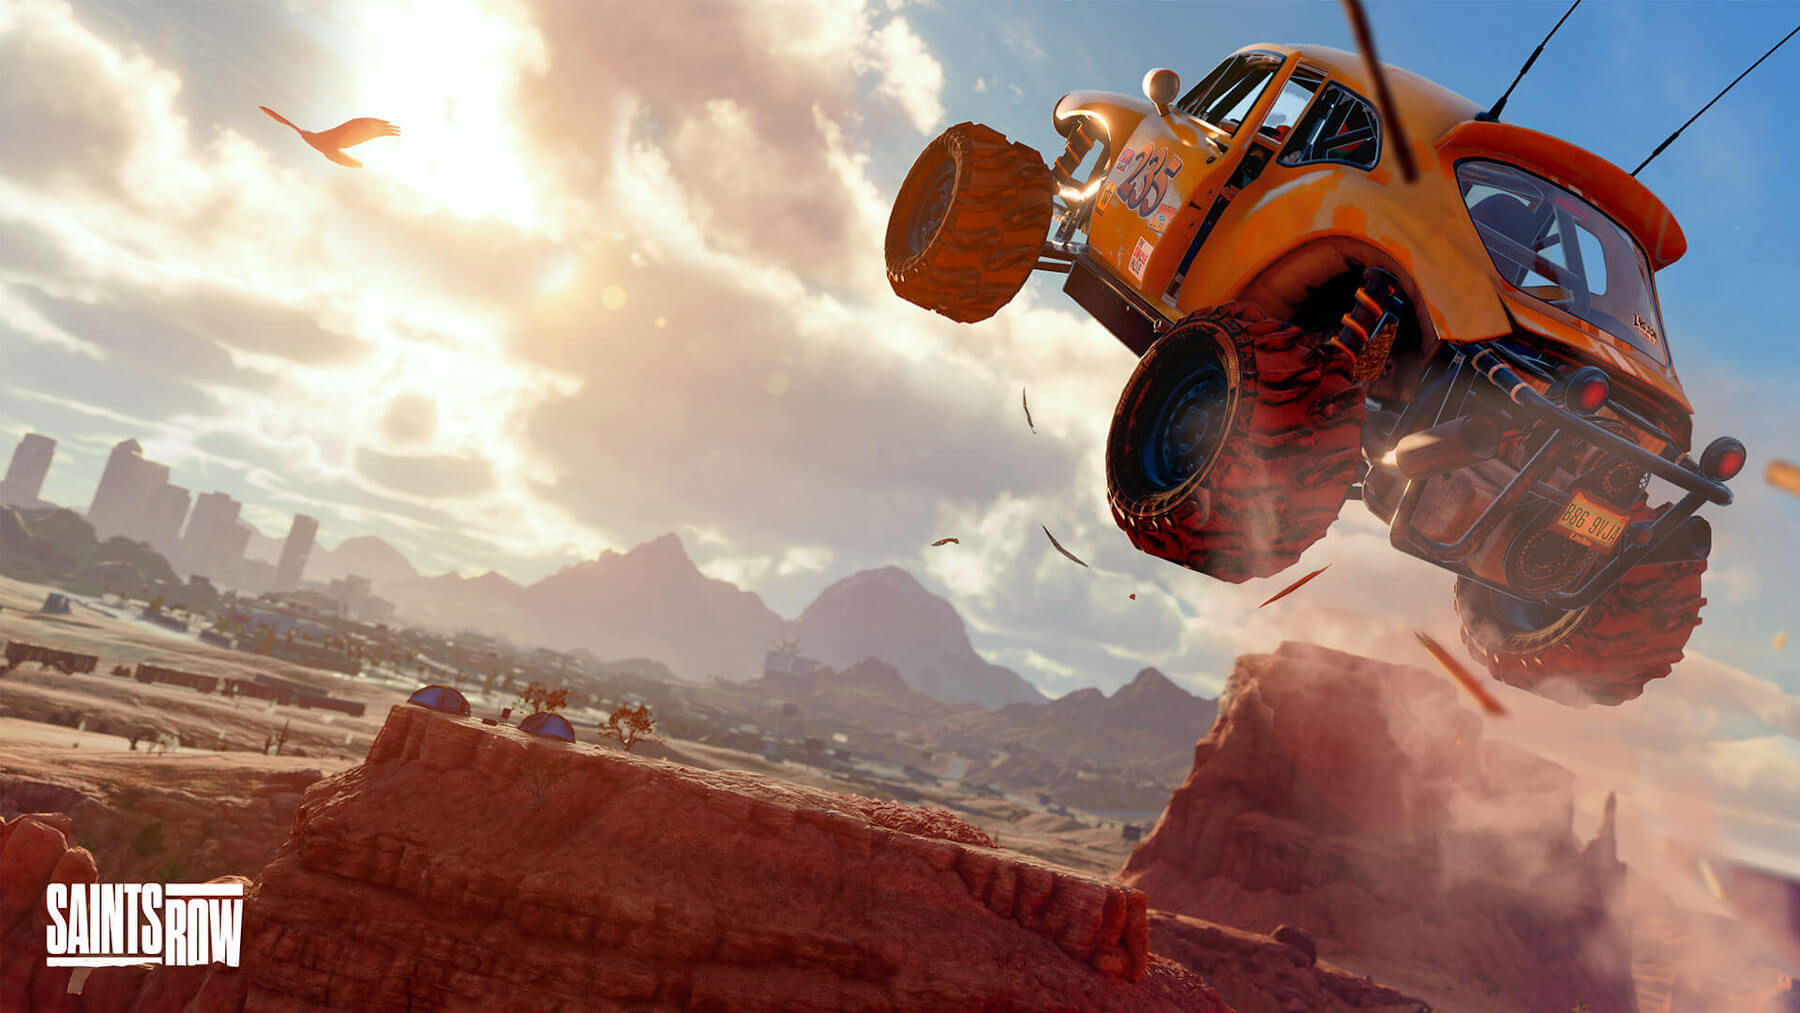 A modified yellow dune buggy launches across a vast canyon.